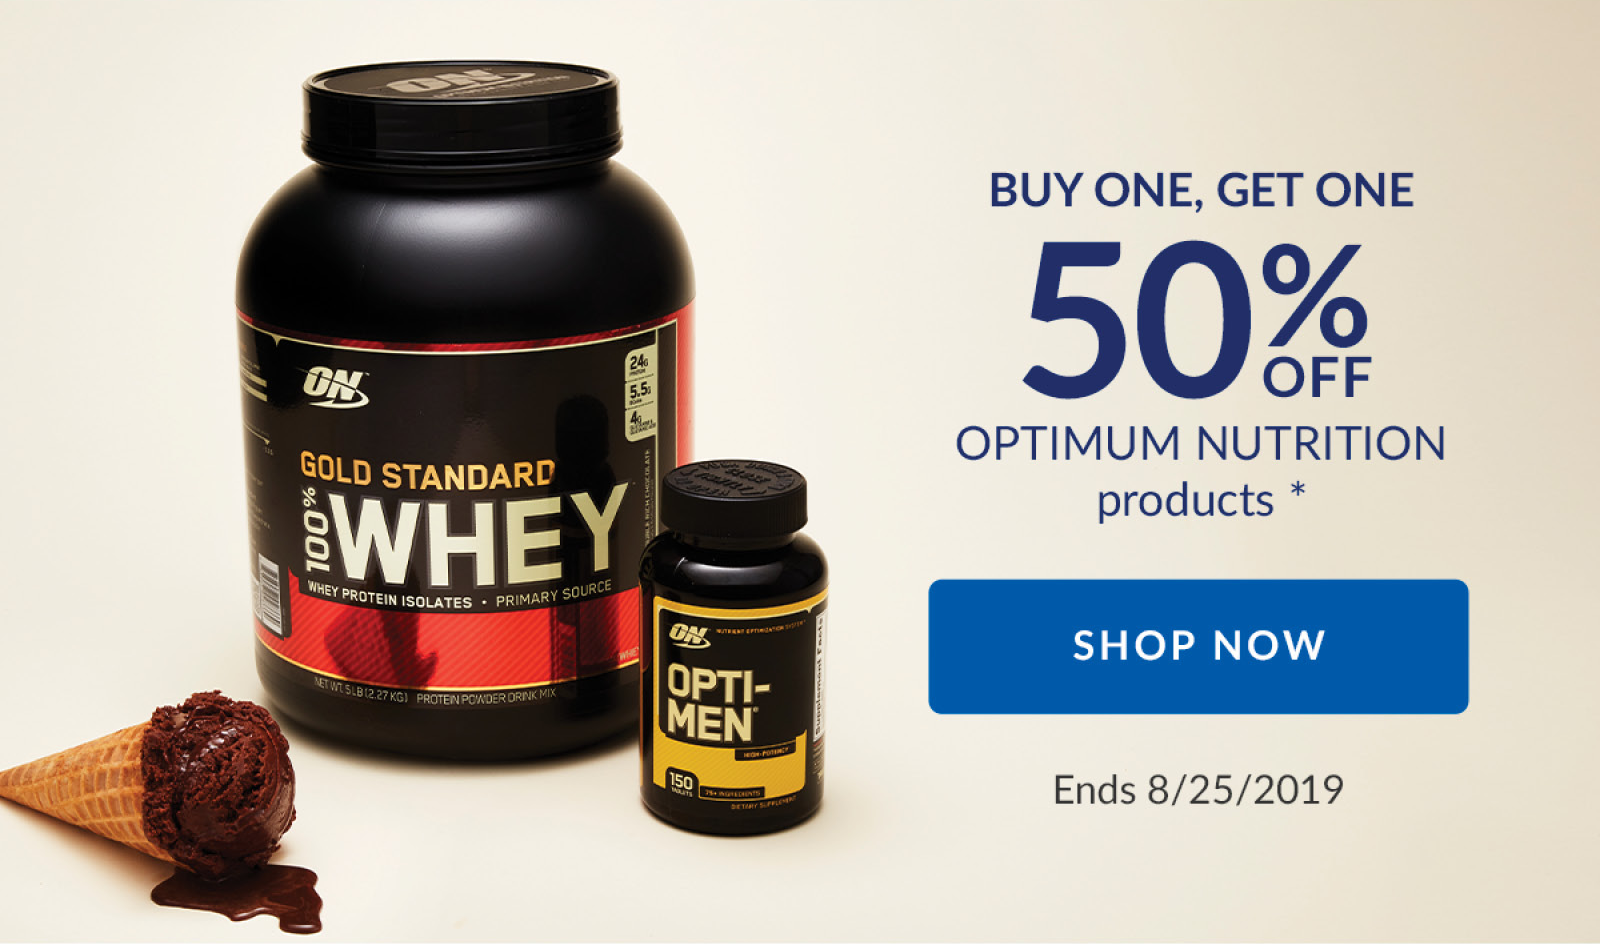 BUY ONE, GET ONE 50% OFF OPTIMUM NUTRITION products * | SHOP NOW | Ends 8/25/2019